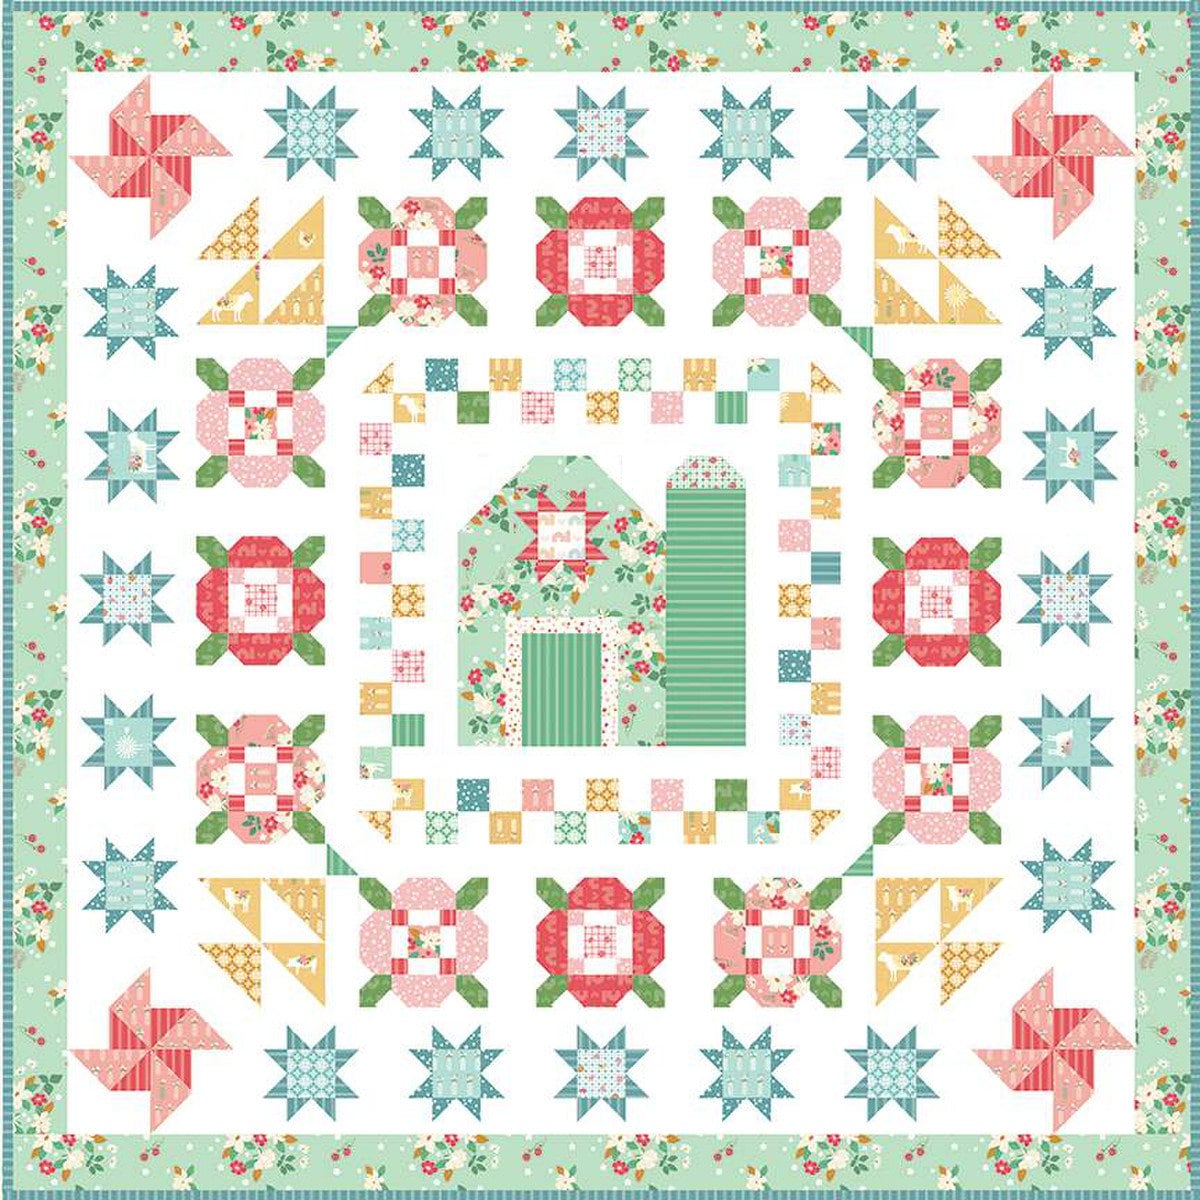 Meadowland Boxed Quilt Kit with Sweet Acres Fabric by Beverly McCullough of Flamingo Toes for Riley Blake Designs - Quilt Kit with Pattern